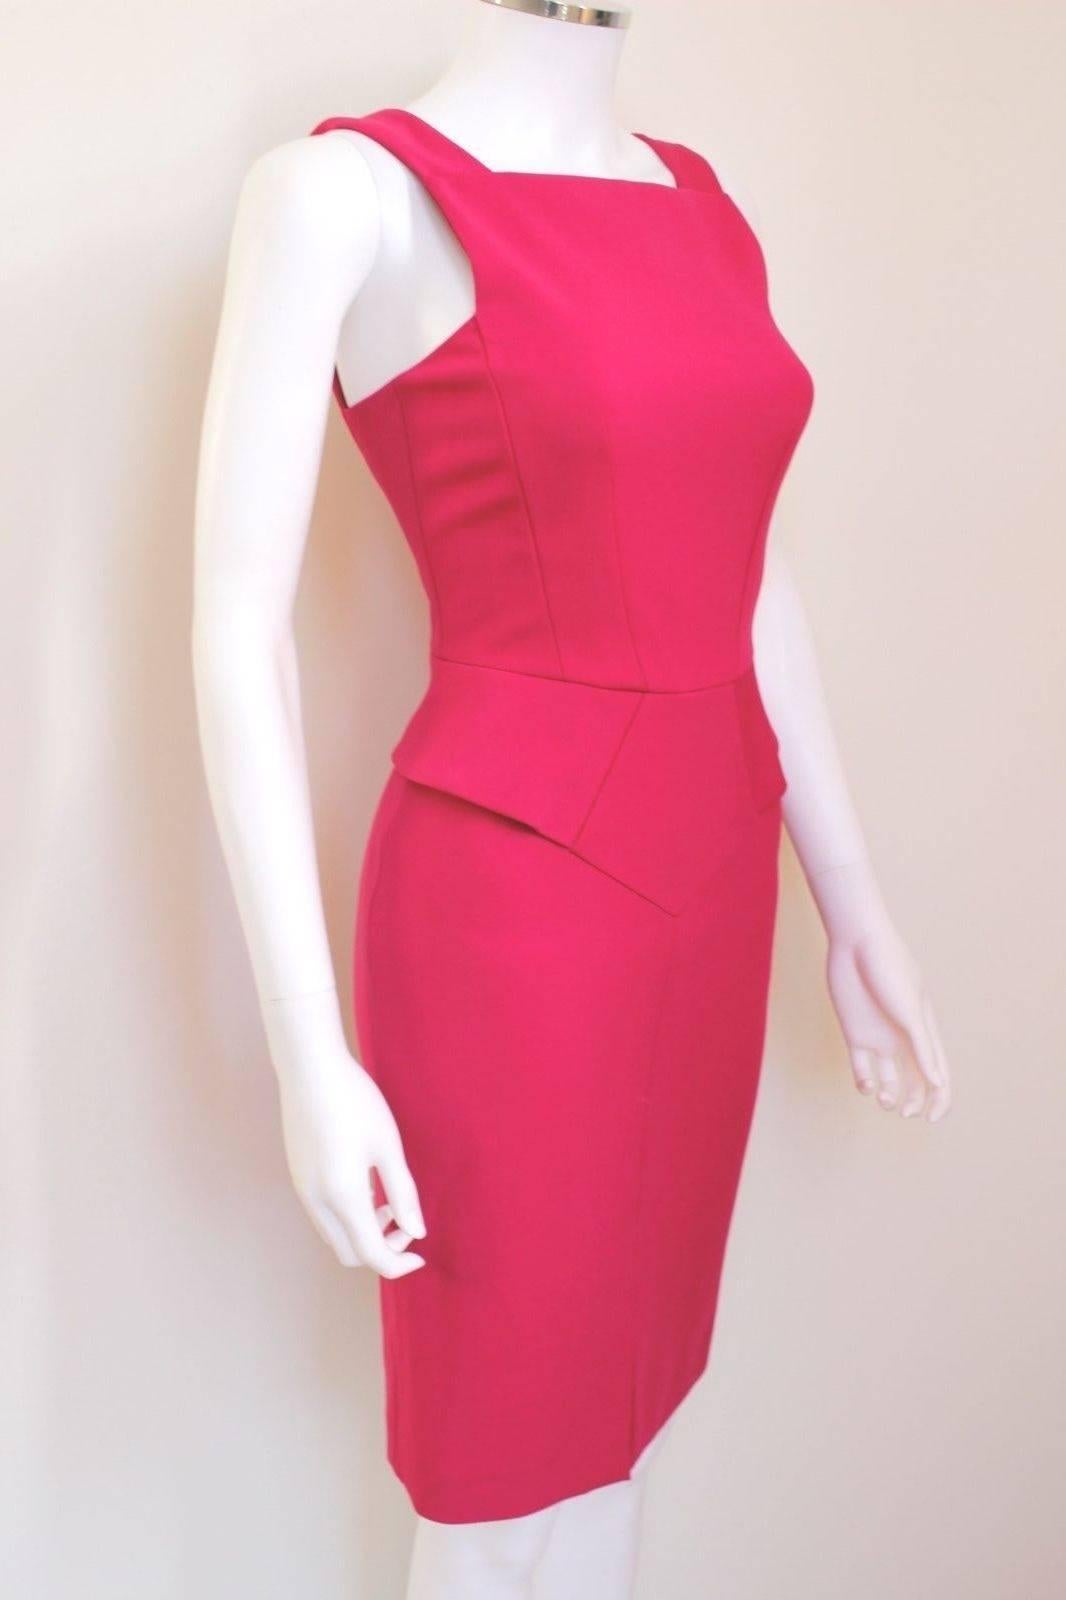 New EMILIO PUCCI Fuchsia Pink Stretch Dress IT 40 uk 8  In New Condition For Sale In London, GB